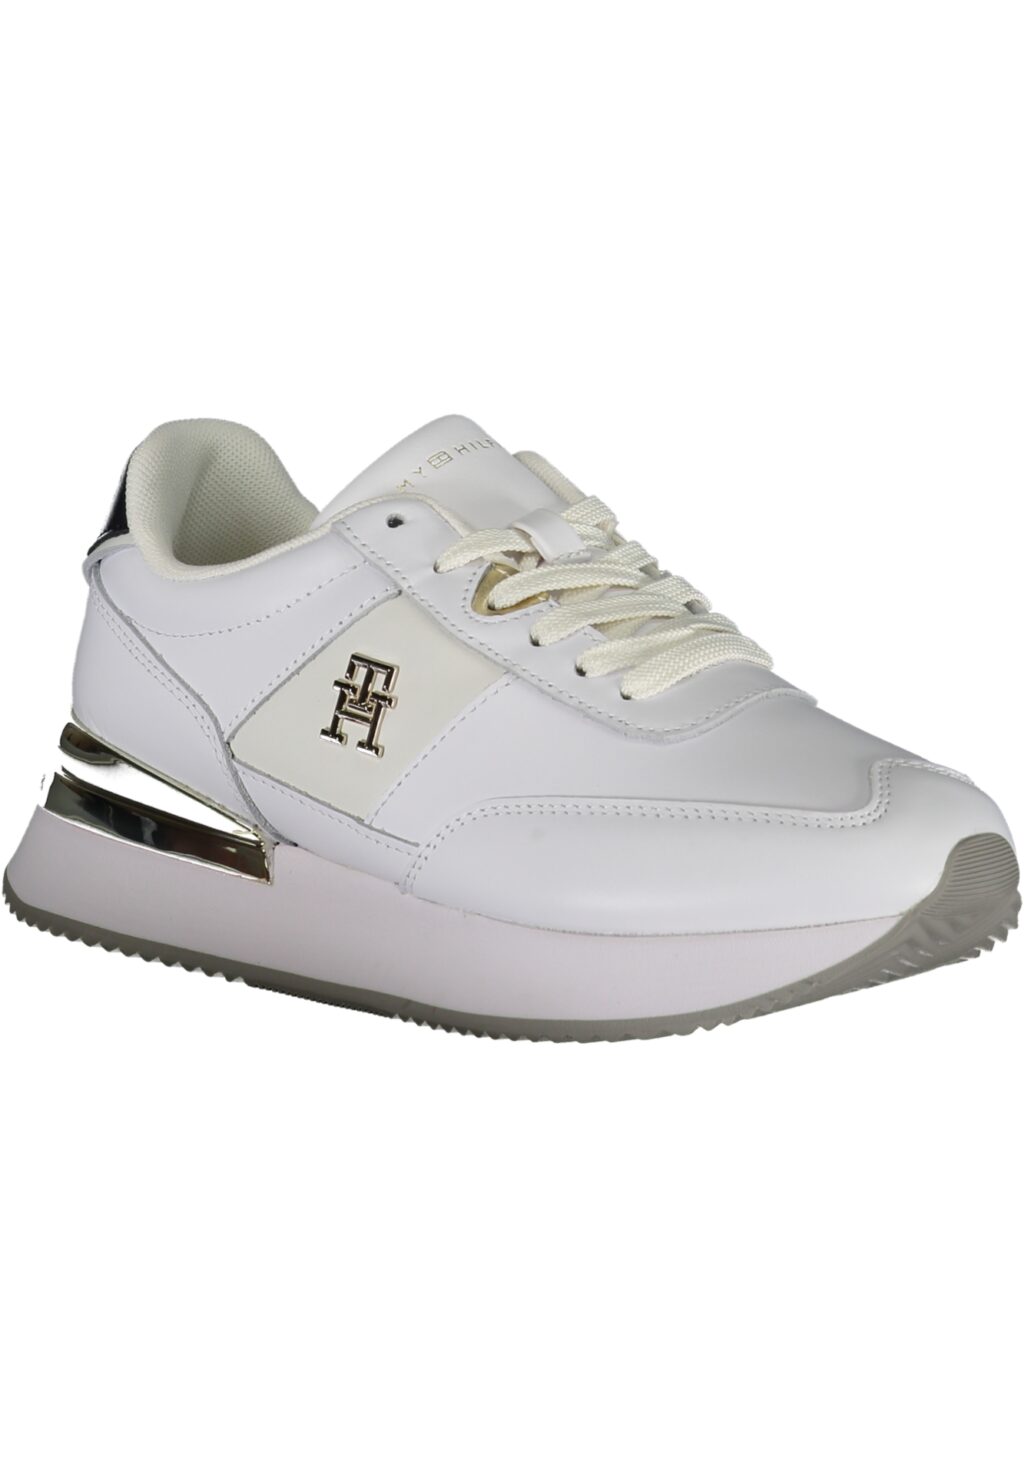 TOMMY HILFIGER WHITE WOMEN'S SPORTS SHOES FW0FW07306F_BIYBS